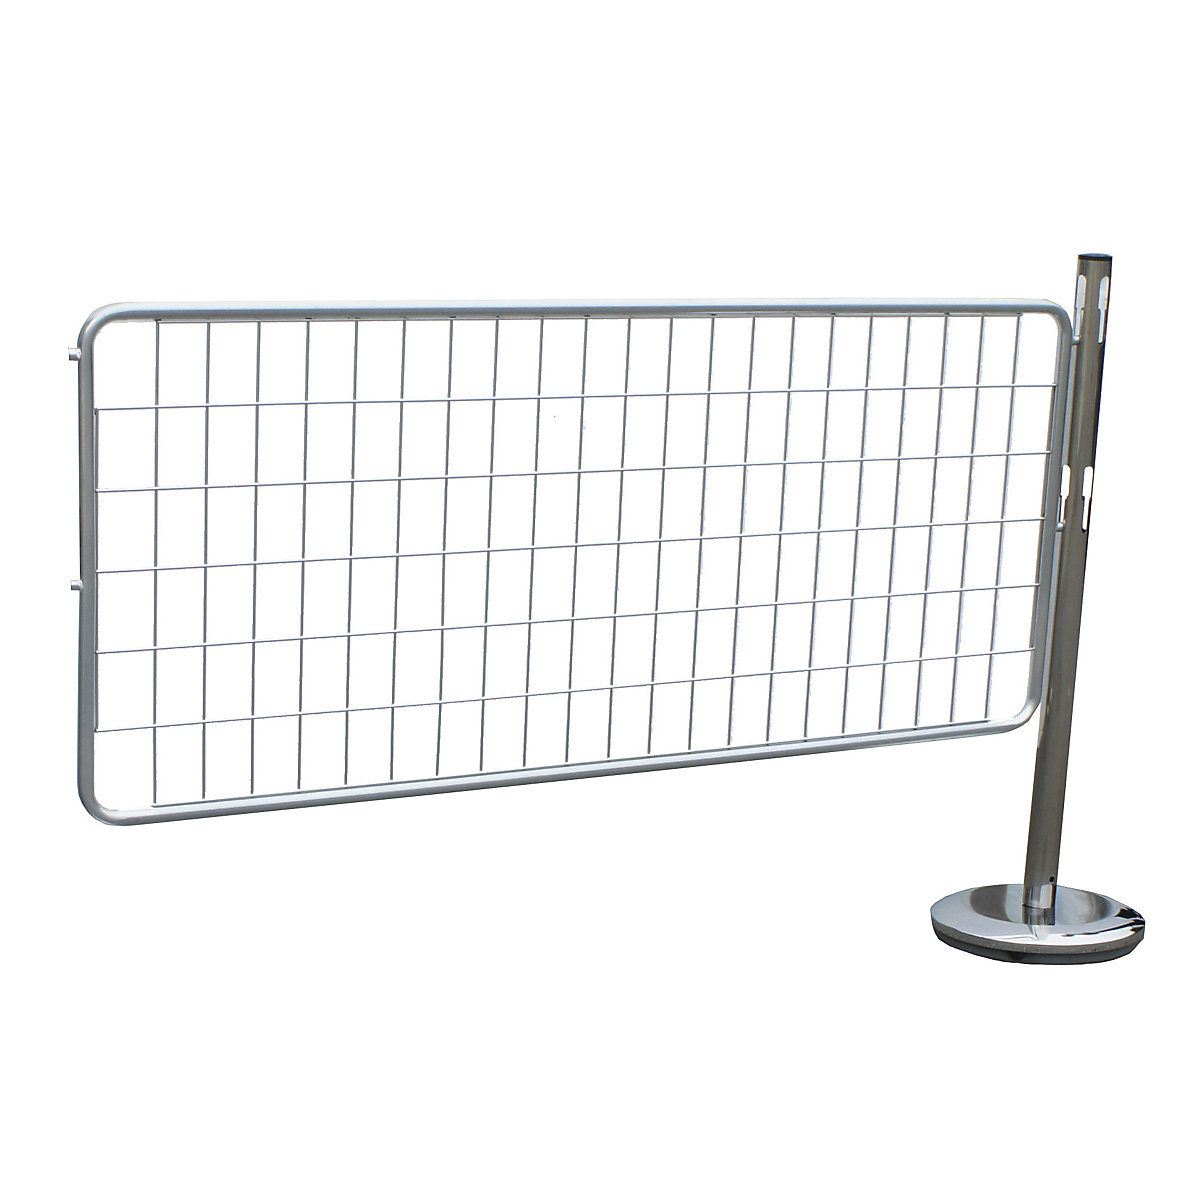 Barrier post extension set with mesh – VISO, 1 post, 1 mesh panel, zinc plated / chrome plated-2